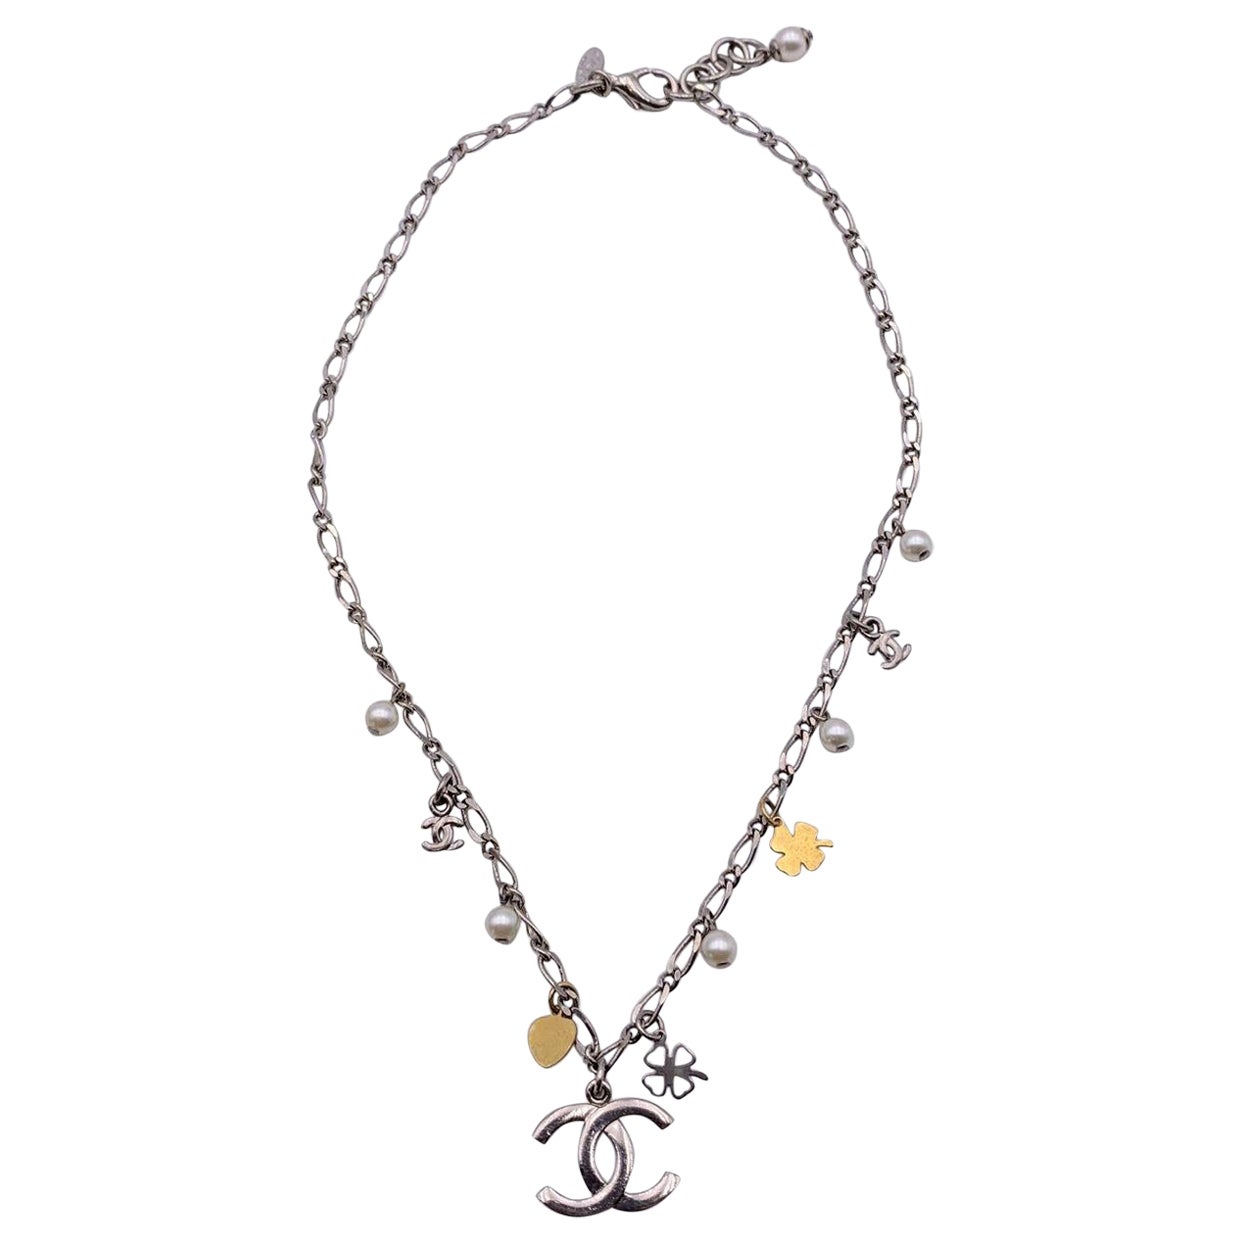 Chanel Silver Metal Chain Necklace with Charms CC Logo Pendant